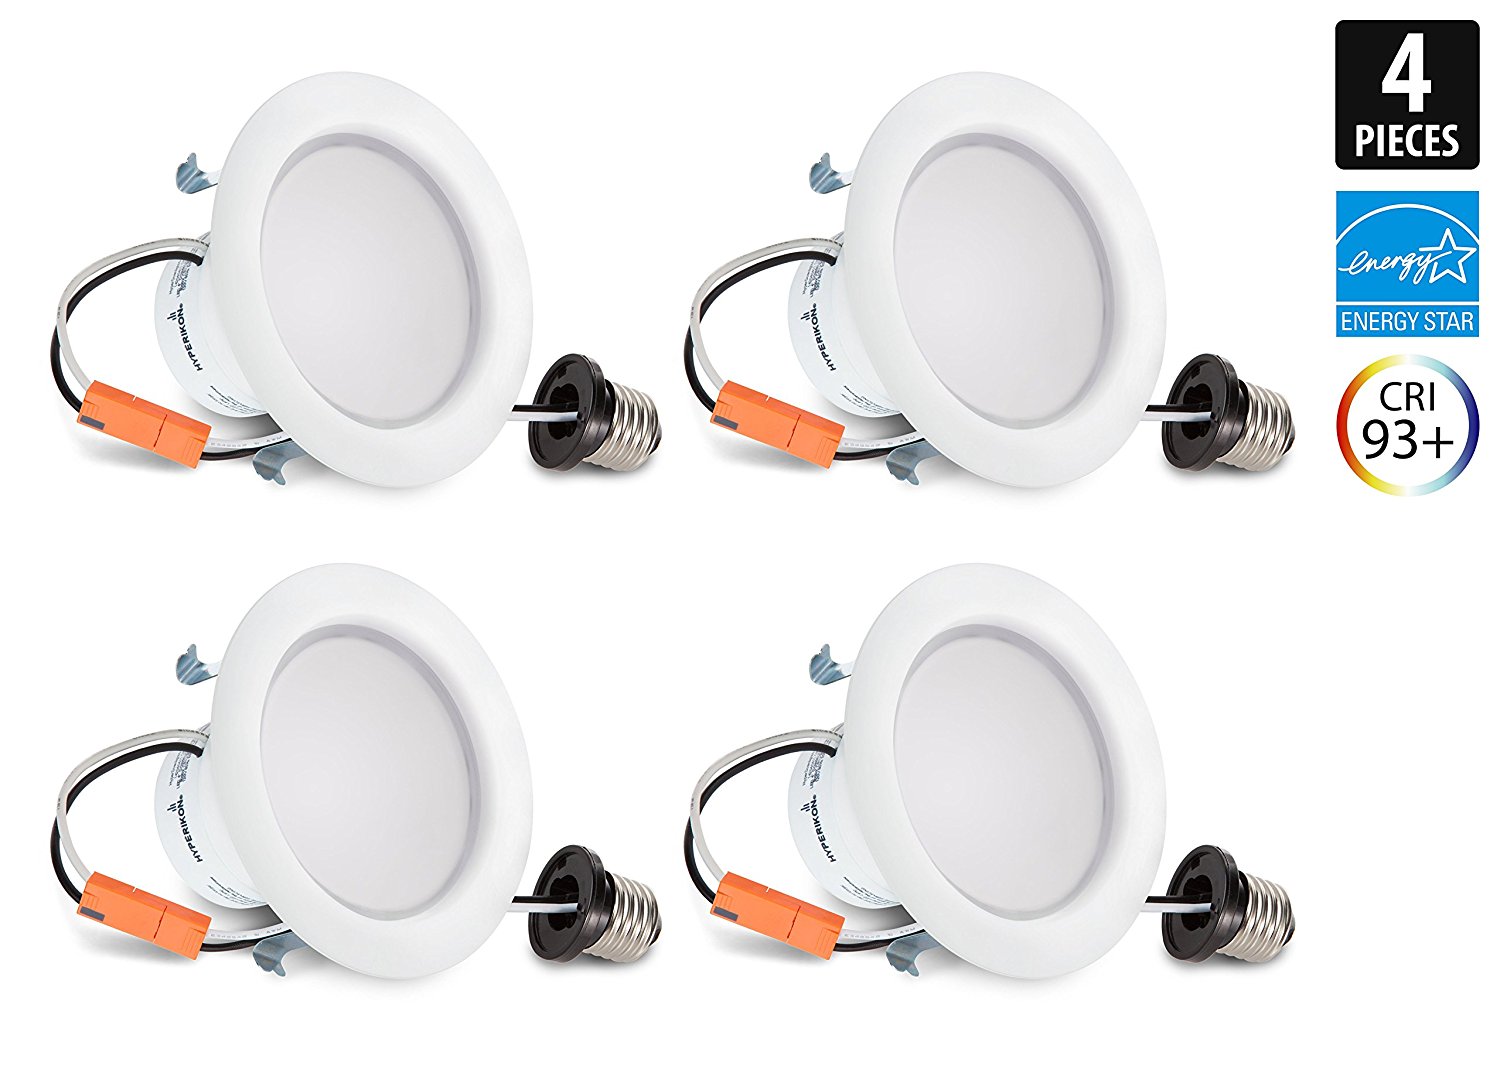 Hyperikon 4 Inch LED Downlight 9W (65W Equivalent), 4000K (Daylight Glow), Dimmable, CRI94, Retrofit LED Recessed Fixture, ENERGY STAR & UL-Listed - Great for Bathroom, Kitchen, Office - (4 Pack)